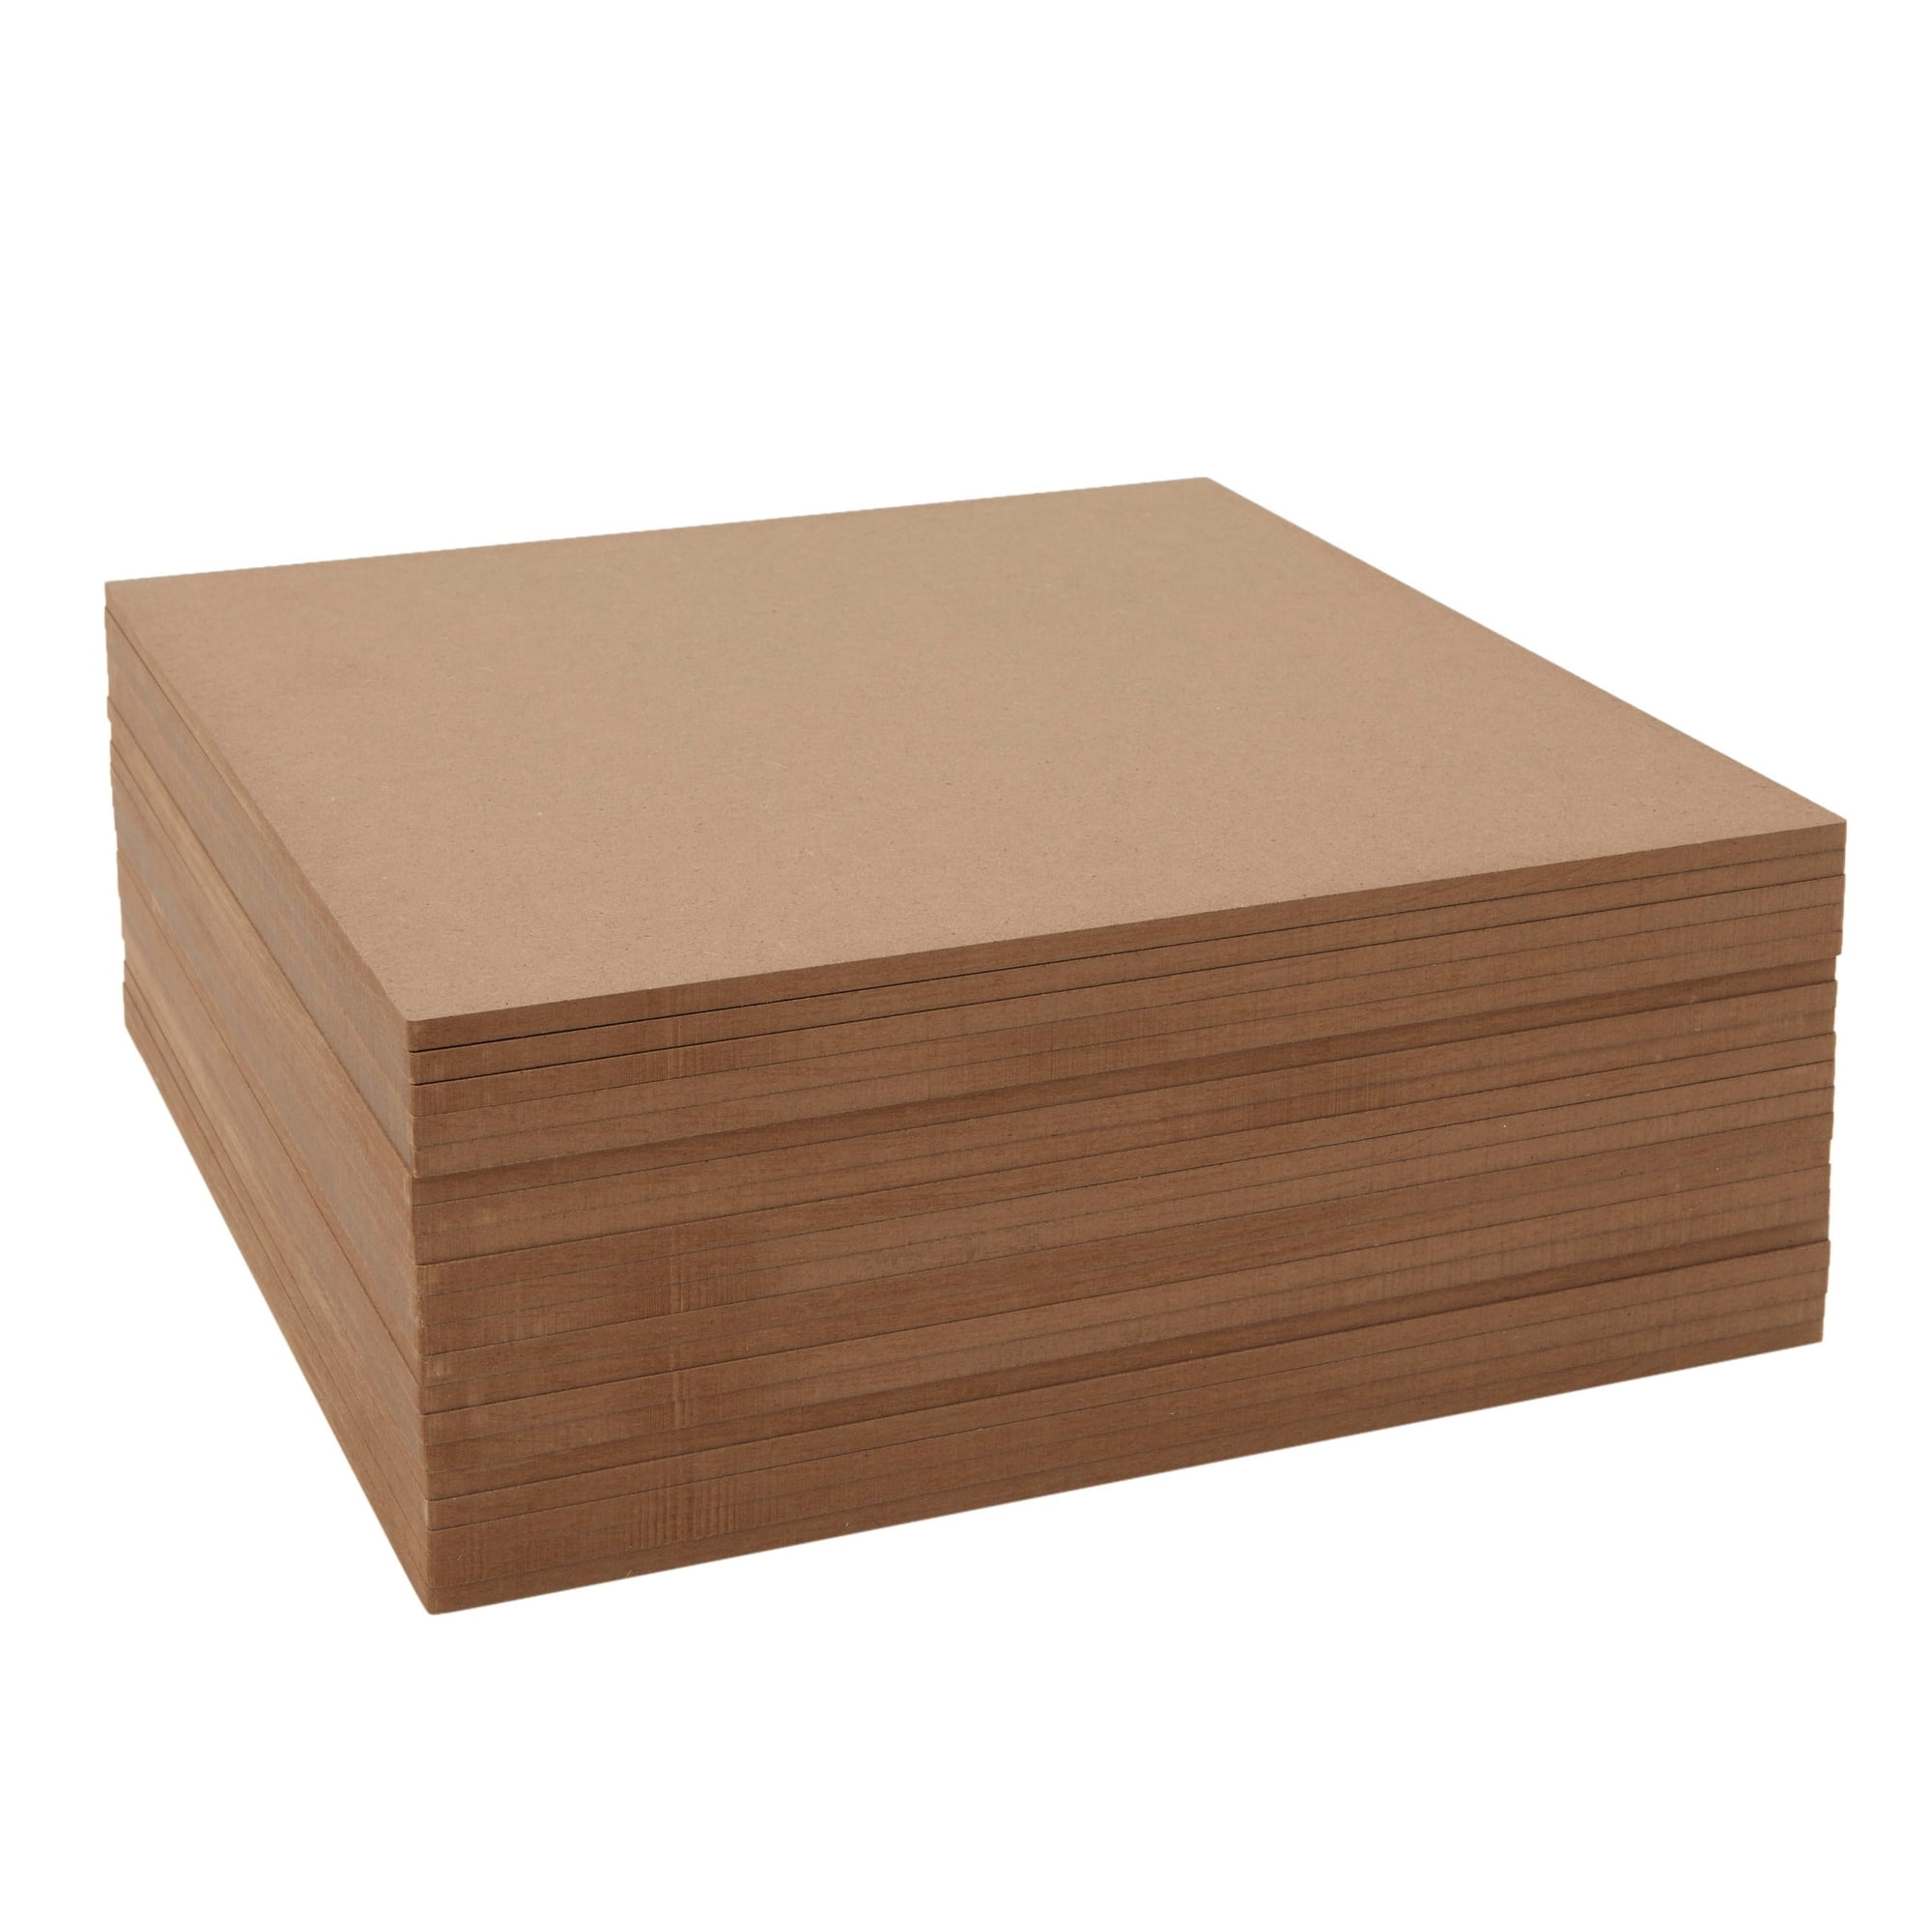 Blank Wood Board, MDF Chipboard Sheets for Crafts (12x12 in, 20 Pack) –  BrightCreationsOfficial